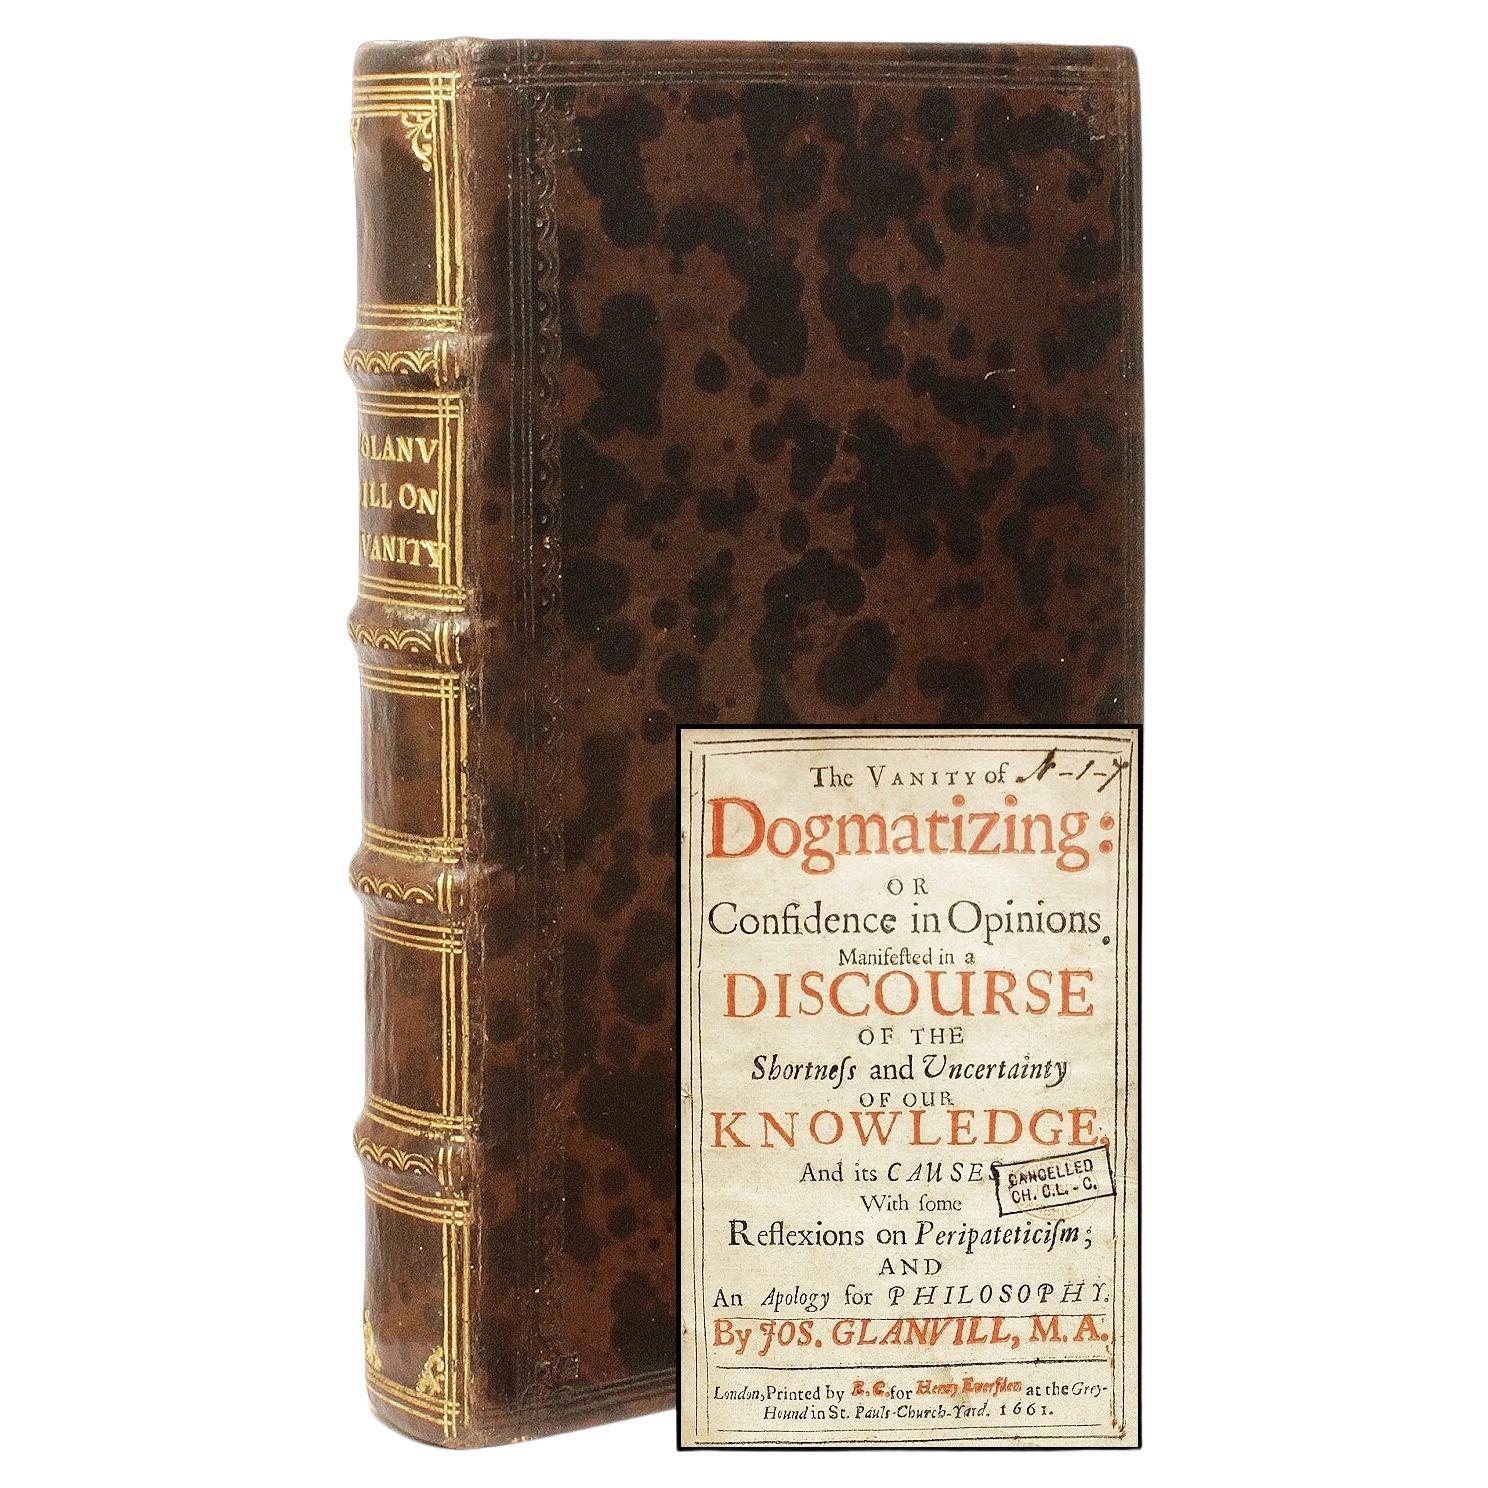 Joseph GLANVILL. The Vanity of Dogmatizing. FIRST EDITION - 1661 - HIS 1st BOOK!